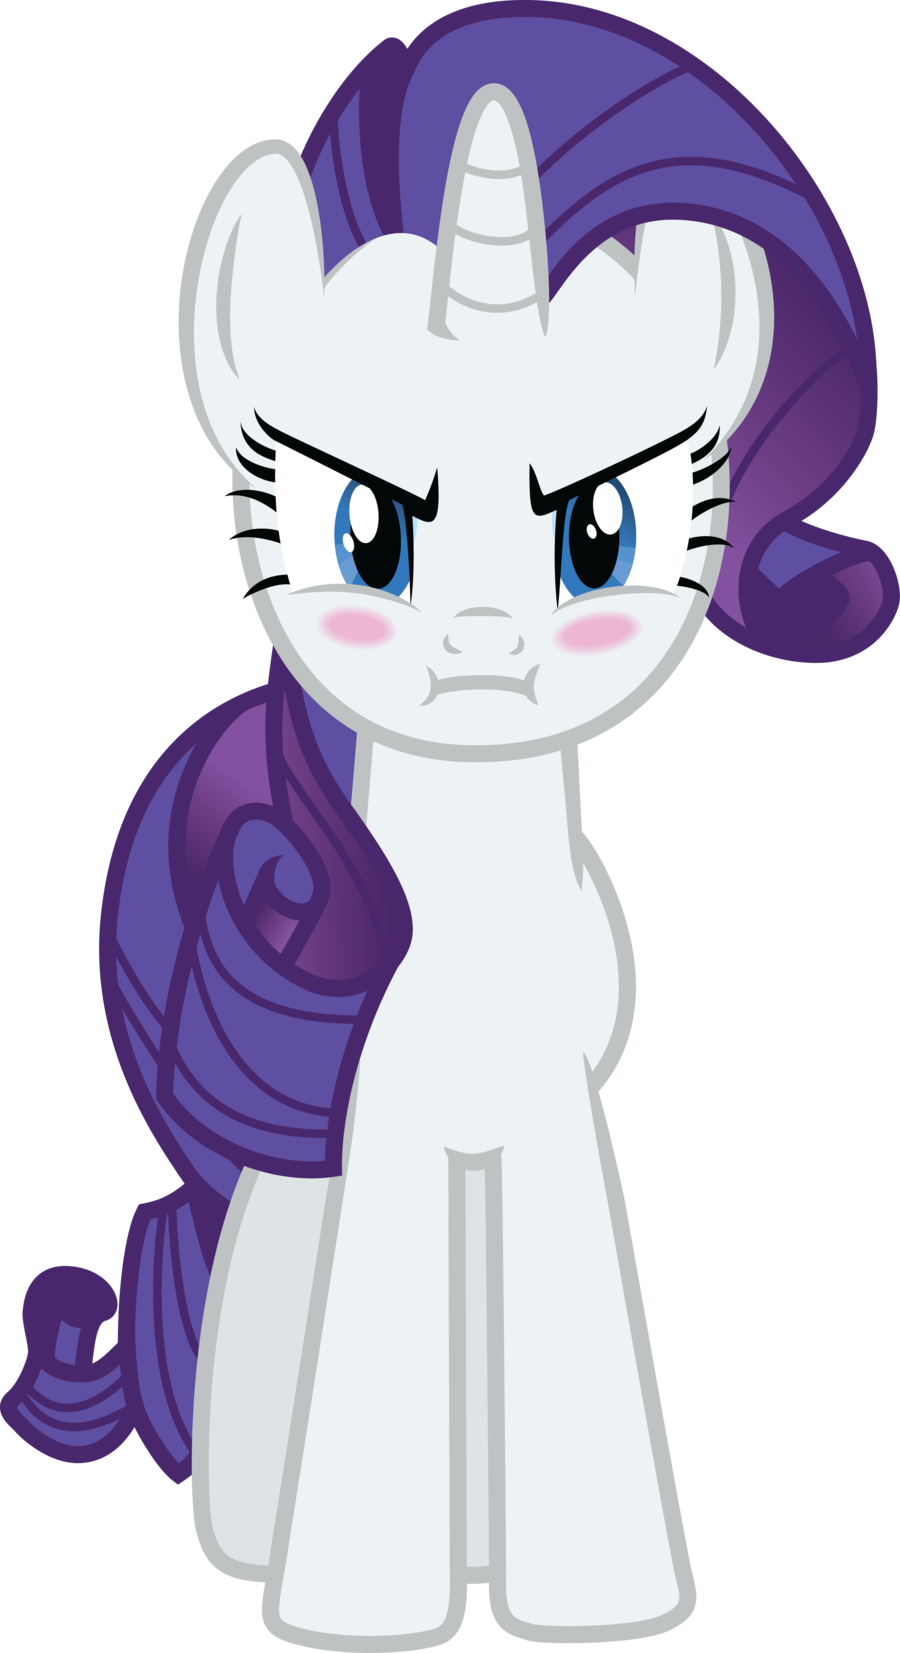 rarity_angry_by_geogo999-d57lalq.png